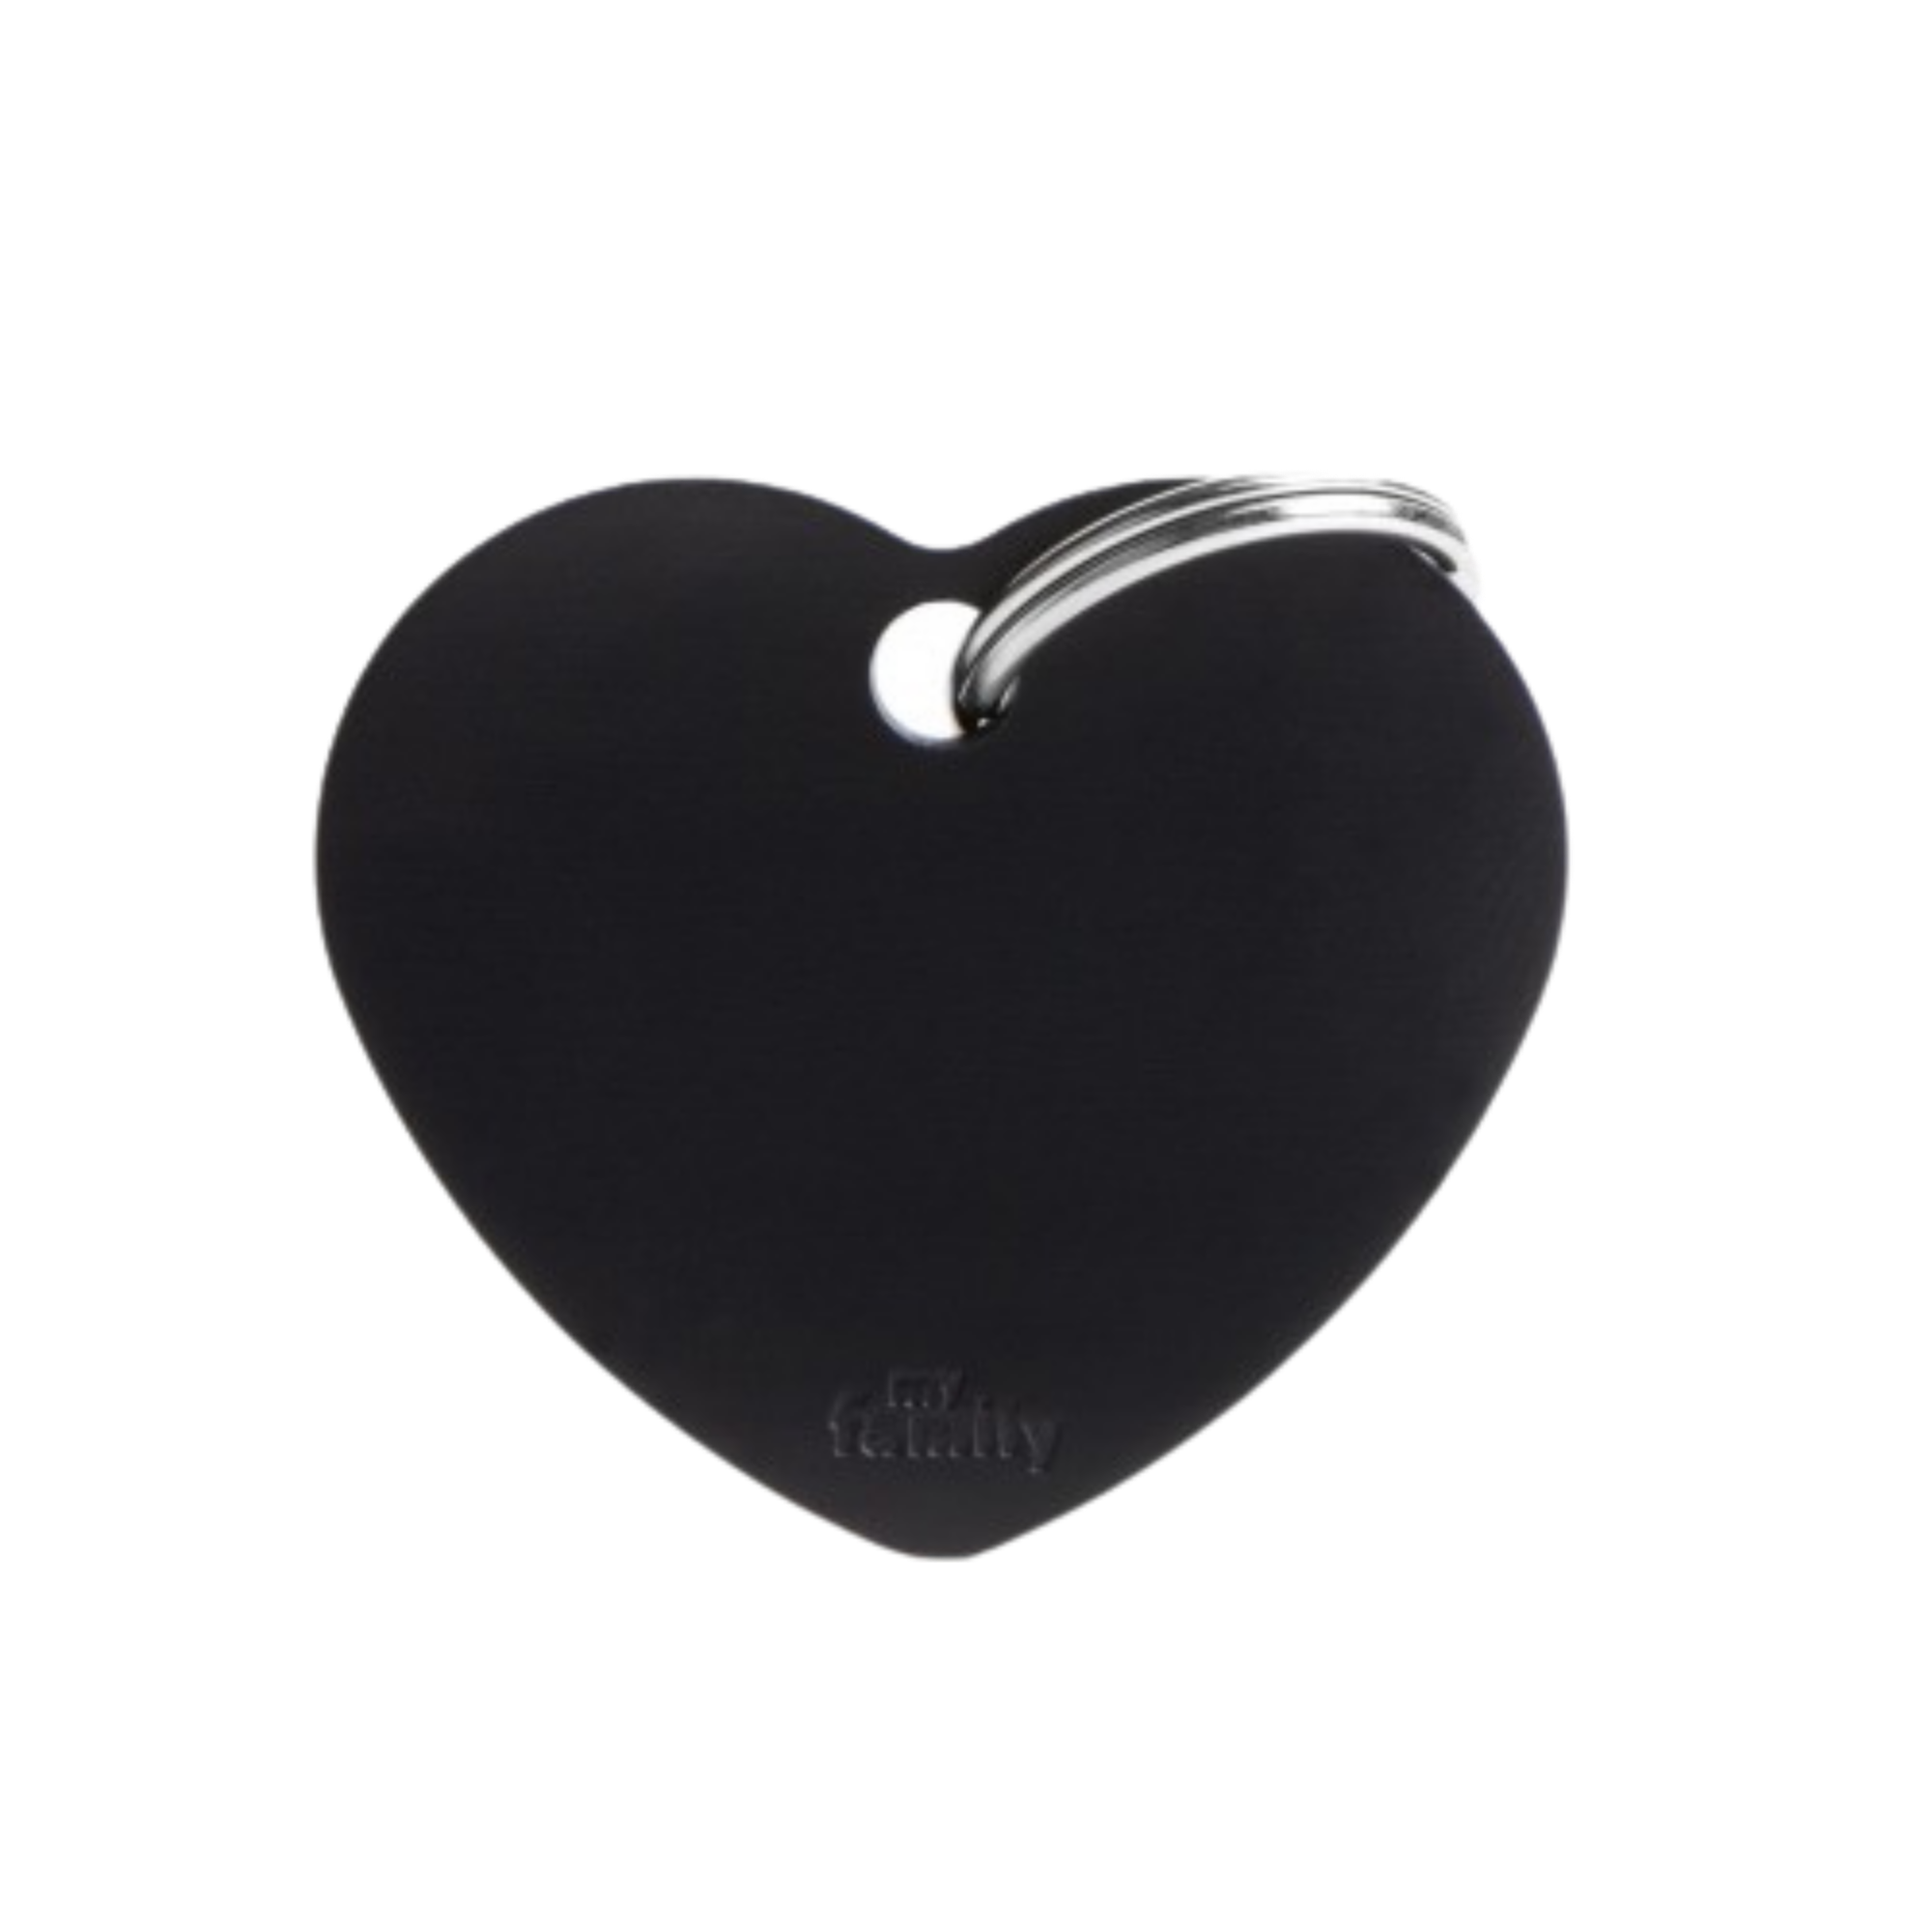 MyFamily Heart Tag Aluminum Black - Mutts & Co.